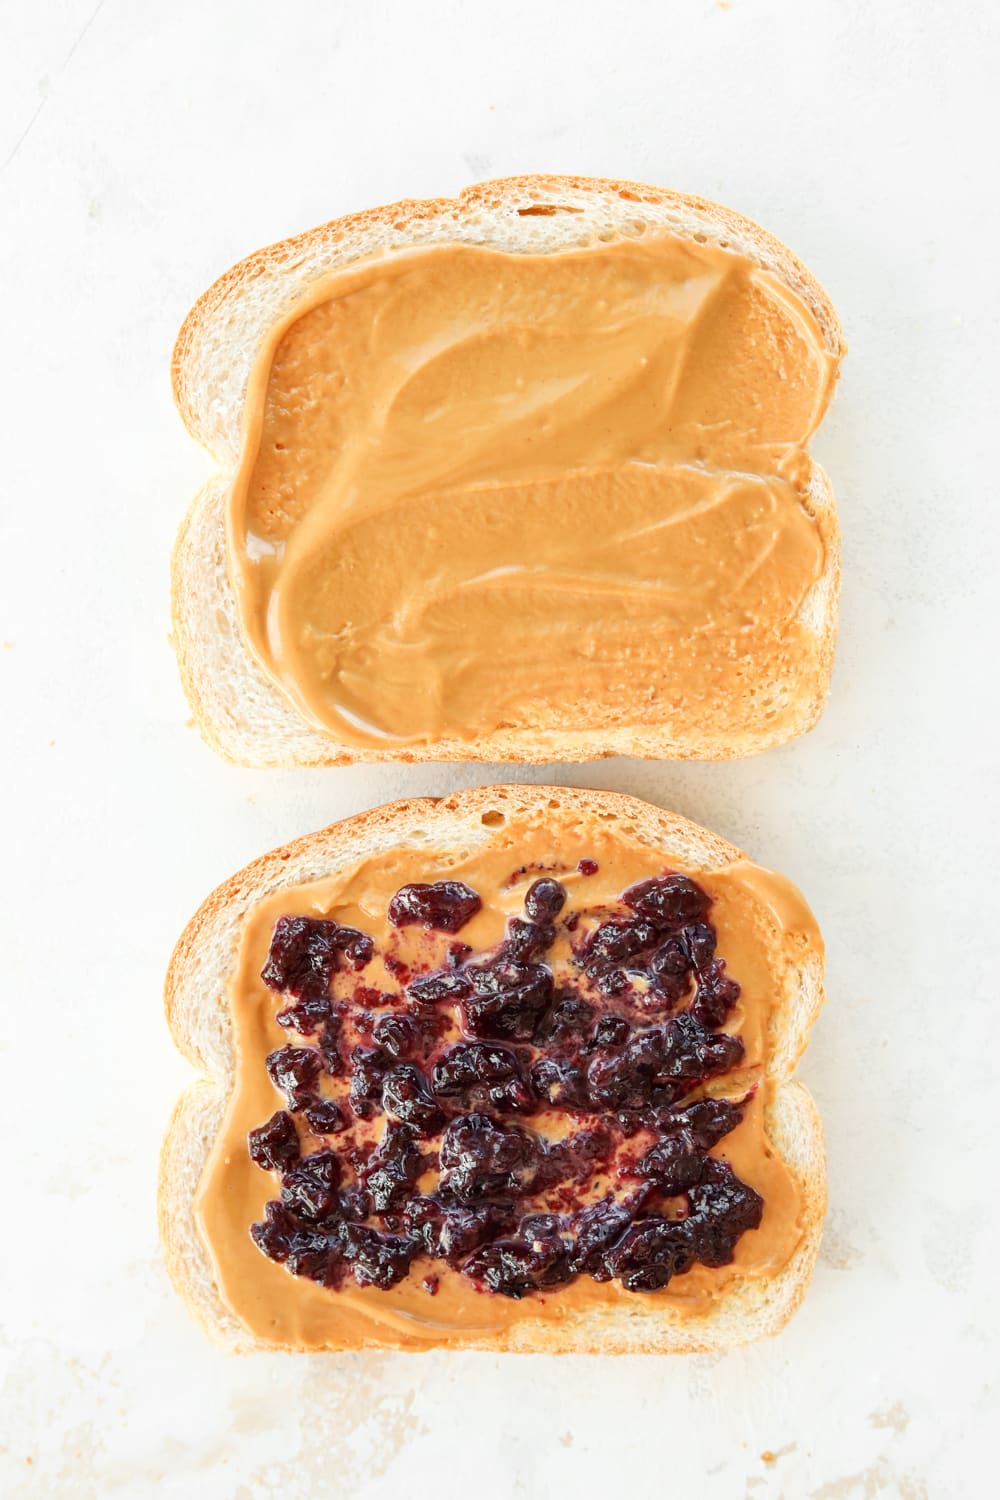 A slice of bread with peanut butter on it and another slice of bread with peanut butter and jelly on it.